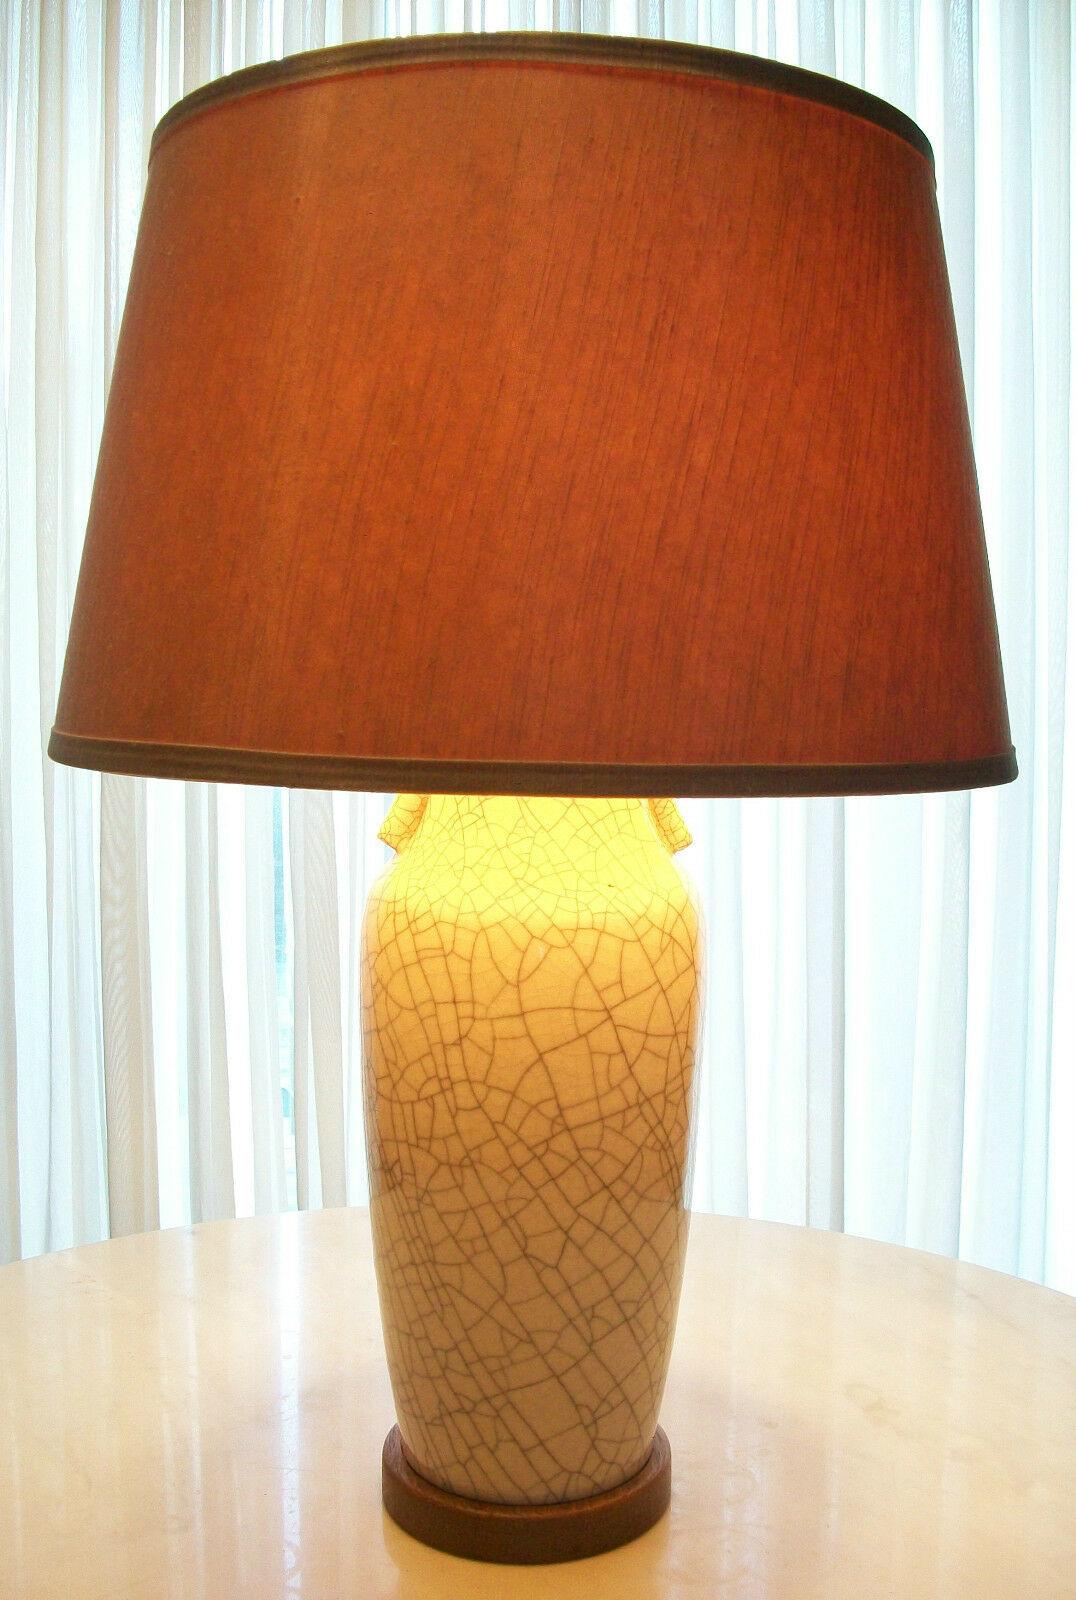 Extraordinary quality and design - Mid-Century Modern - crackle glaze ceramic lamp with original solid oak base/cap/finial and fittings - marked on the ceramic base - Made in Japan - impressed multi character Japanese mark - circa 1940. The harp is